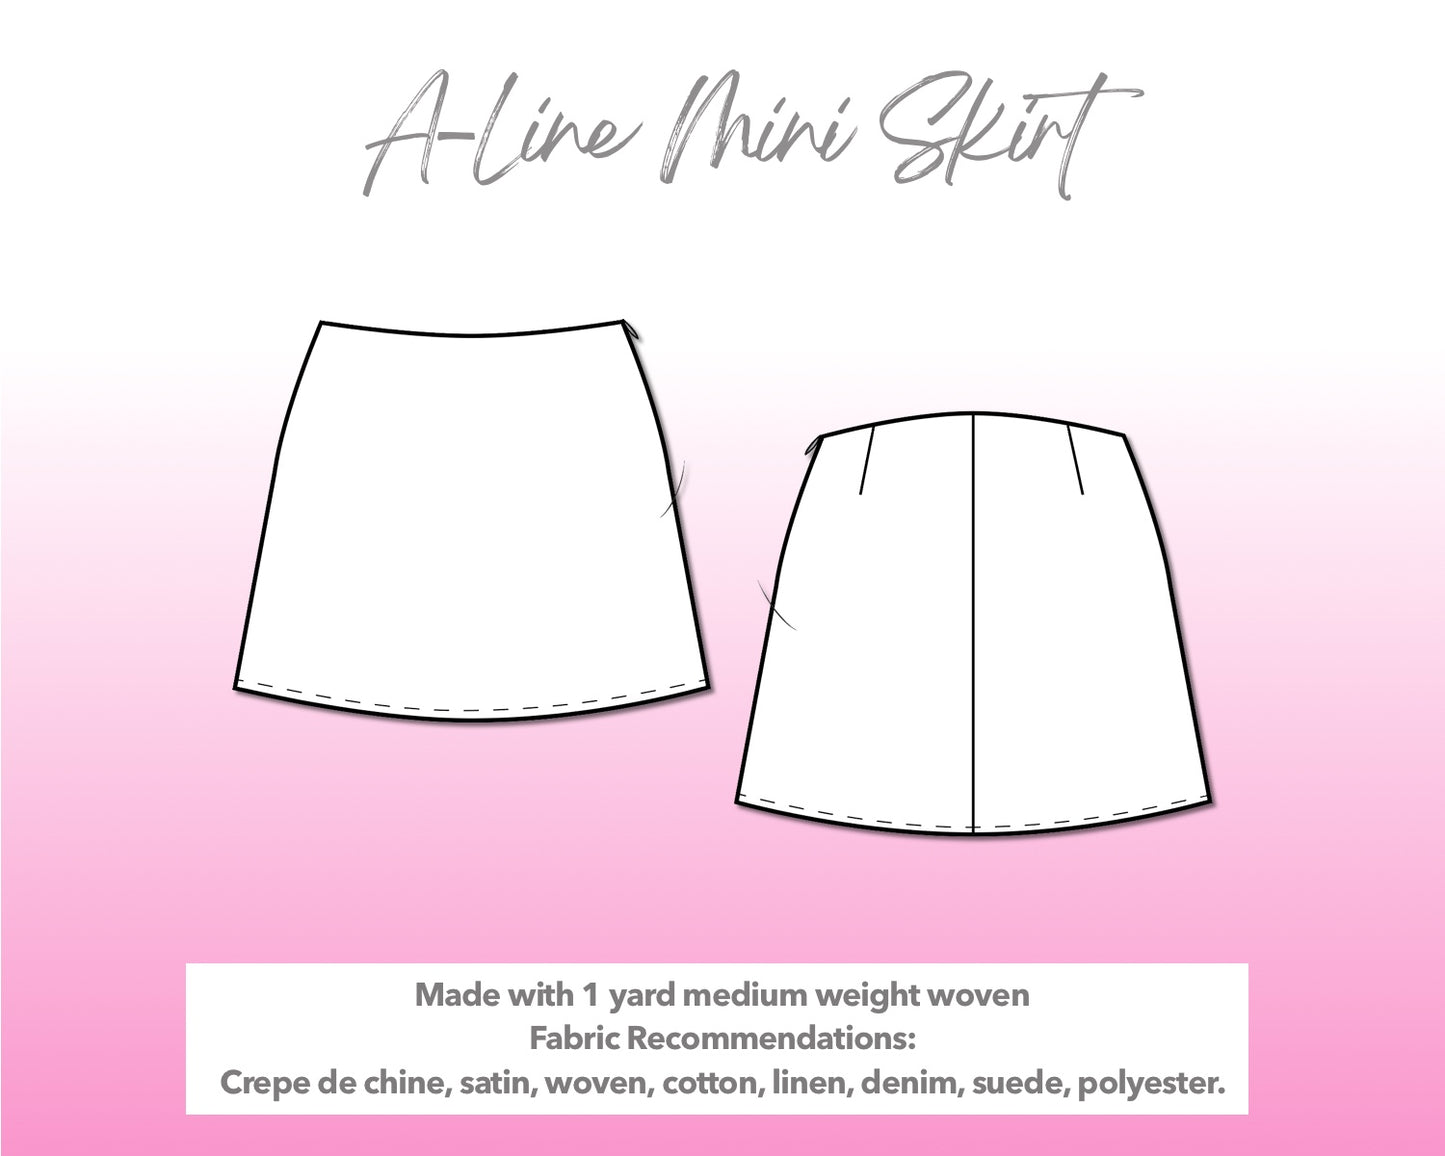 Illustration and detailed description for A Line Mini Skirt sewing pattern.